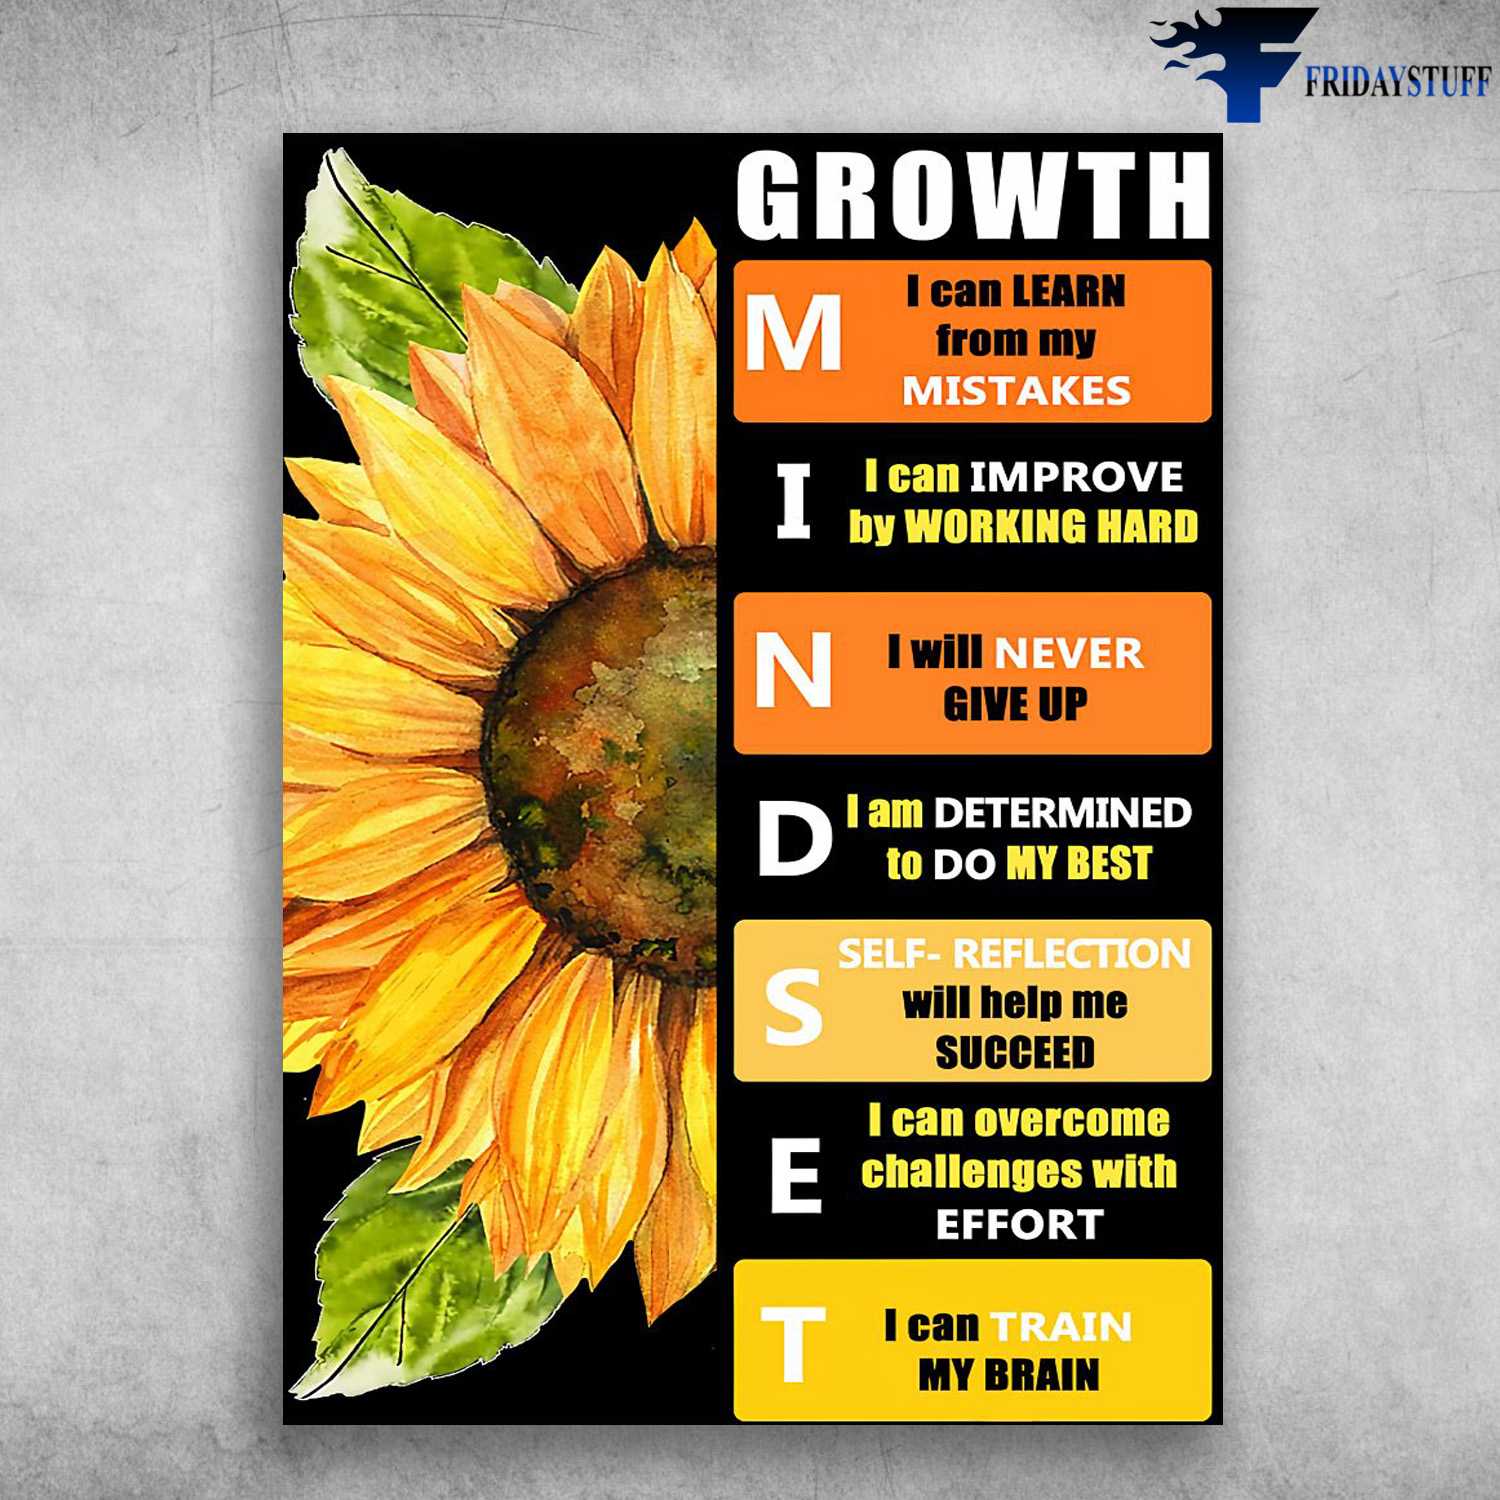 Sunflower Poster, Growth Mindset, I can Learn From Mistakes, I Can Improve By Working Hard, I Will Never Give Up, I Am Determined To Do My Best